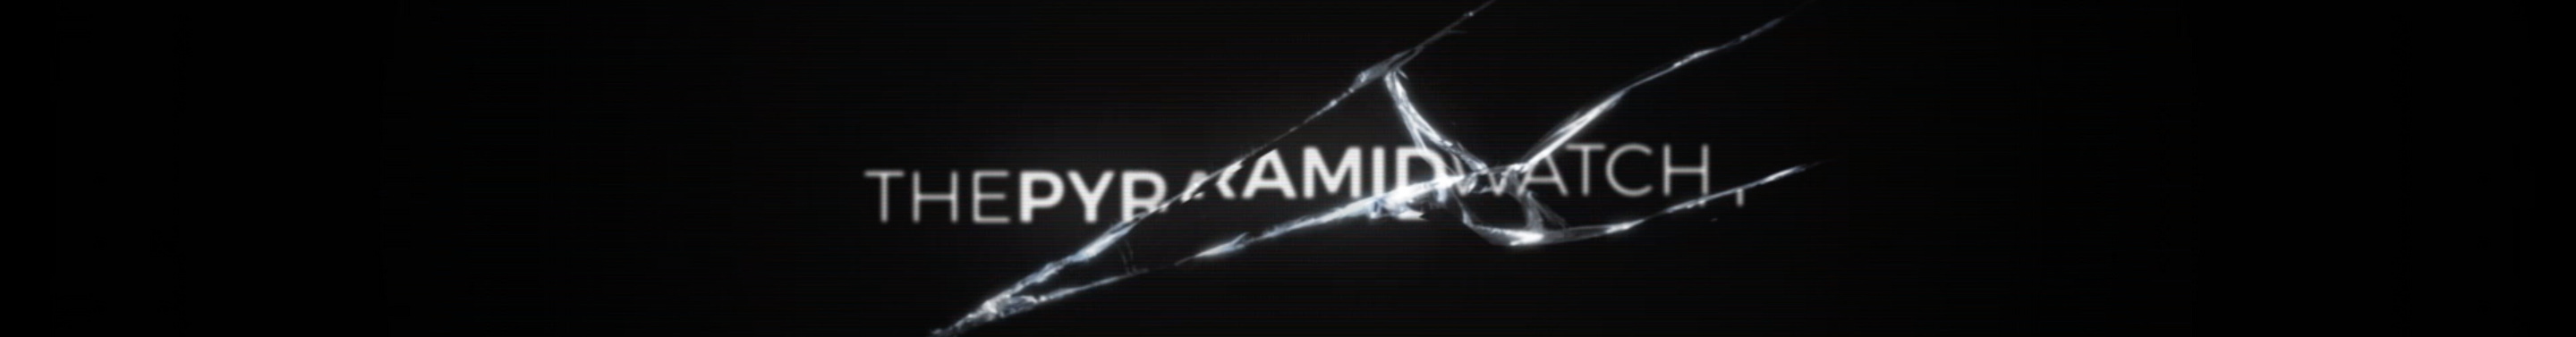 THE PYRAMID WATCH's profile banner